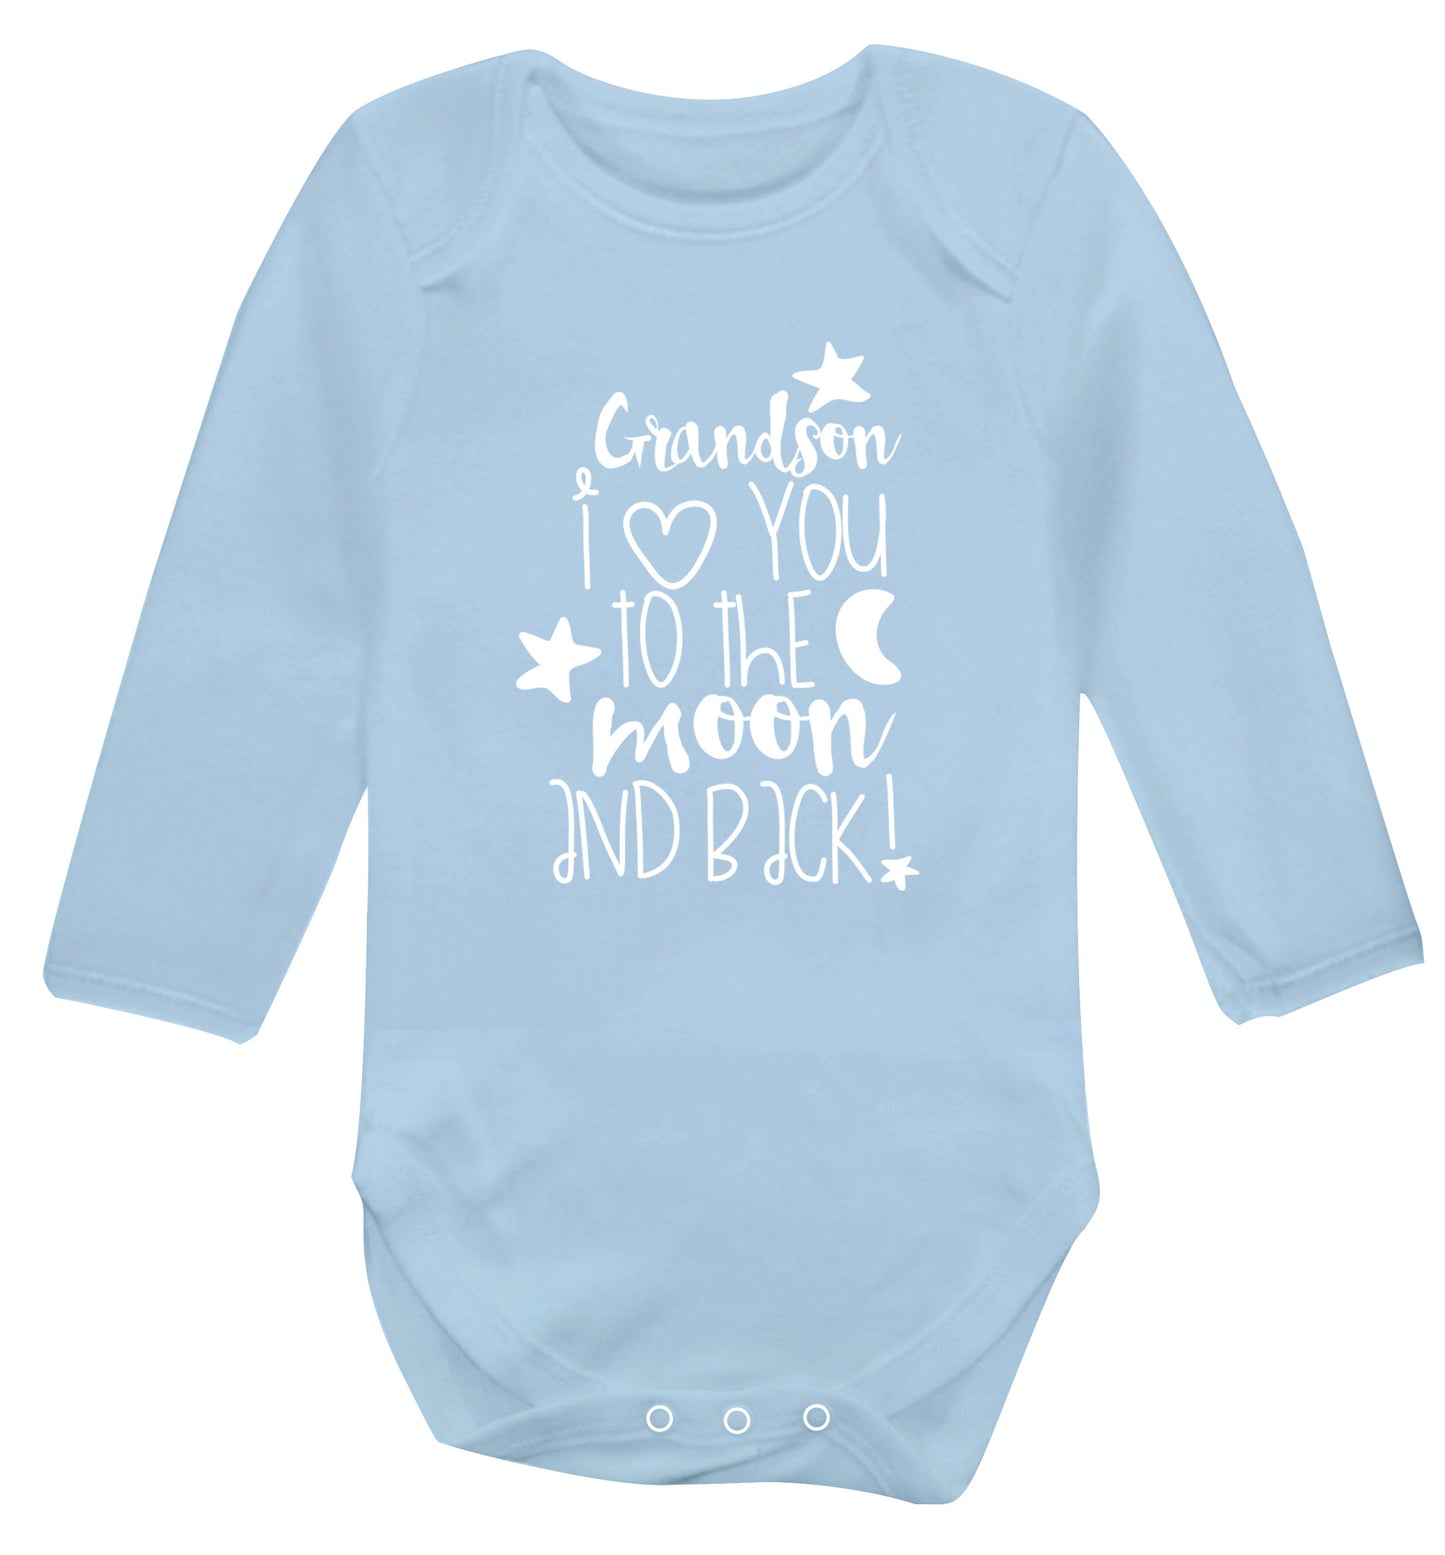 Grandson I love you to the moon and back Baby Vest long sleeved pale blue 6-12 months